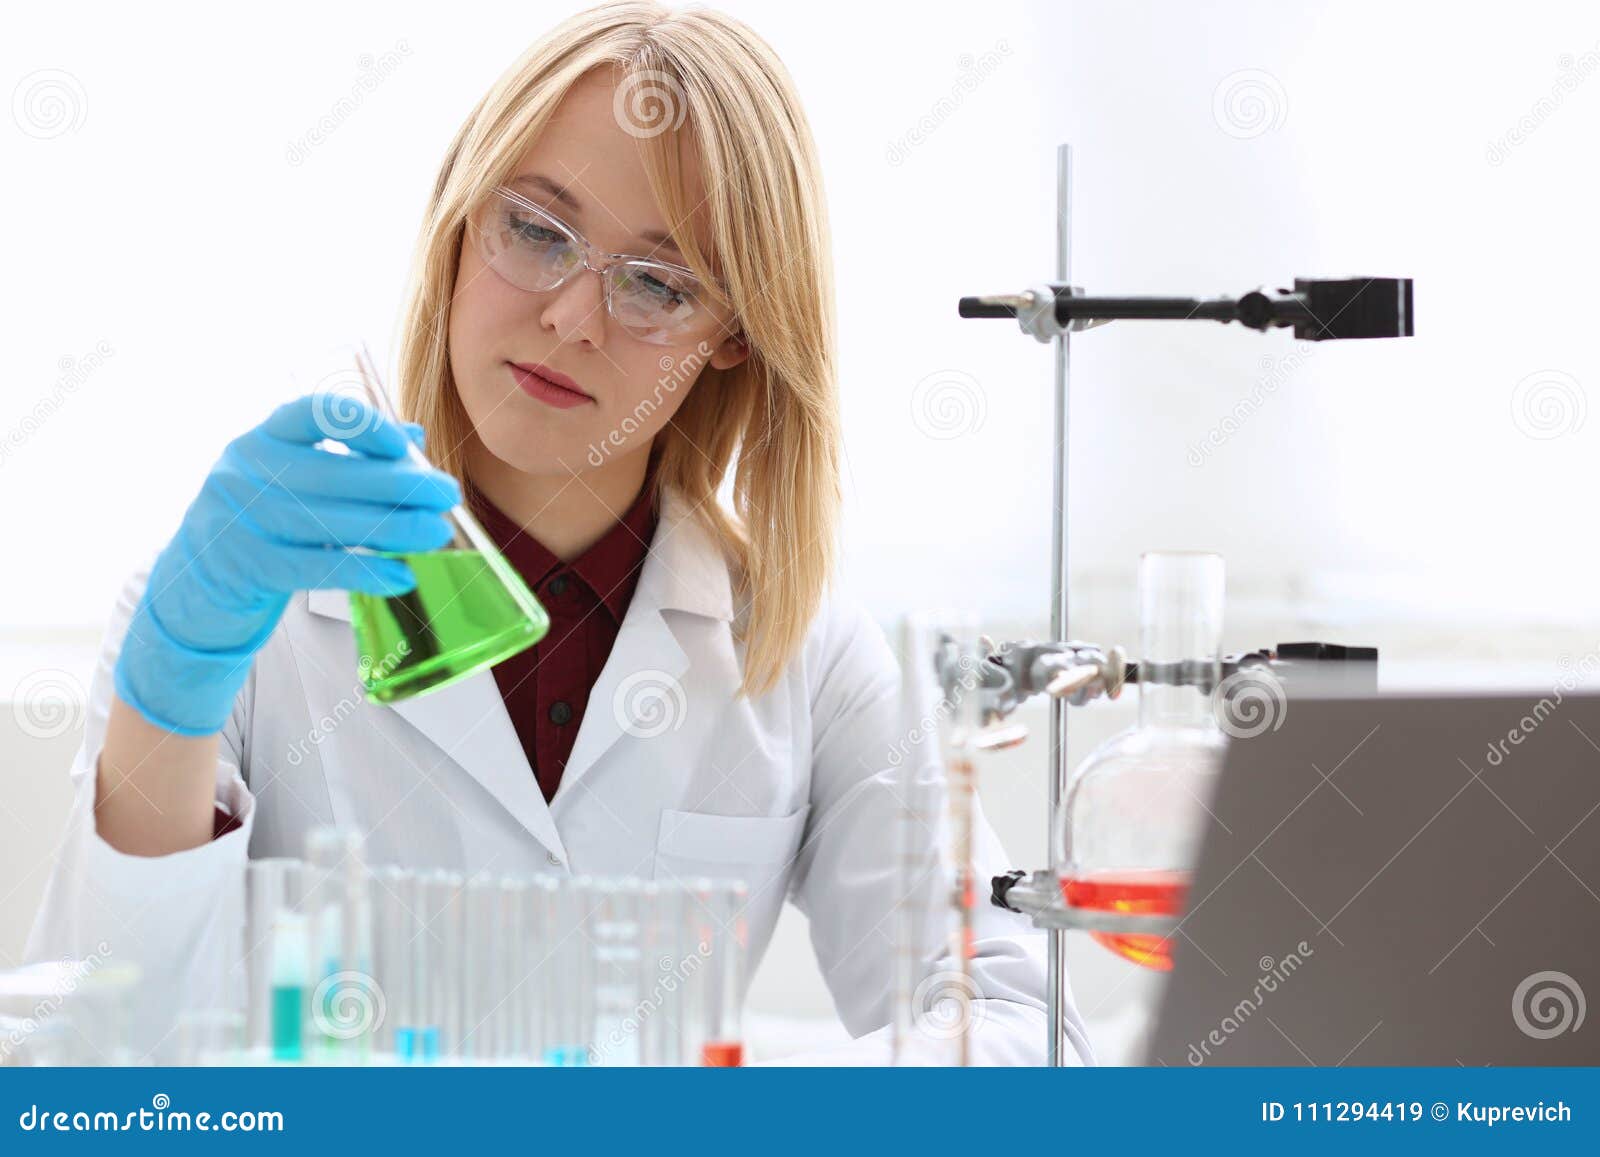 Technician Hold in Arms in Protective Gloves Stock Image - Image of ...